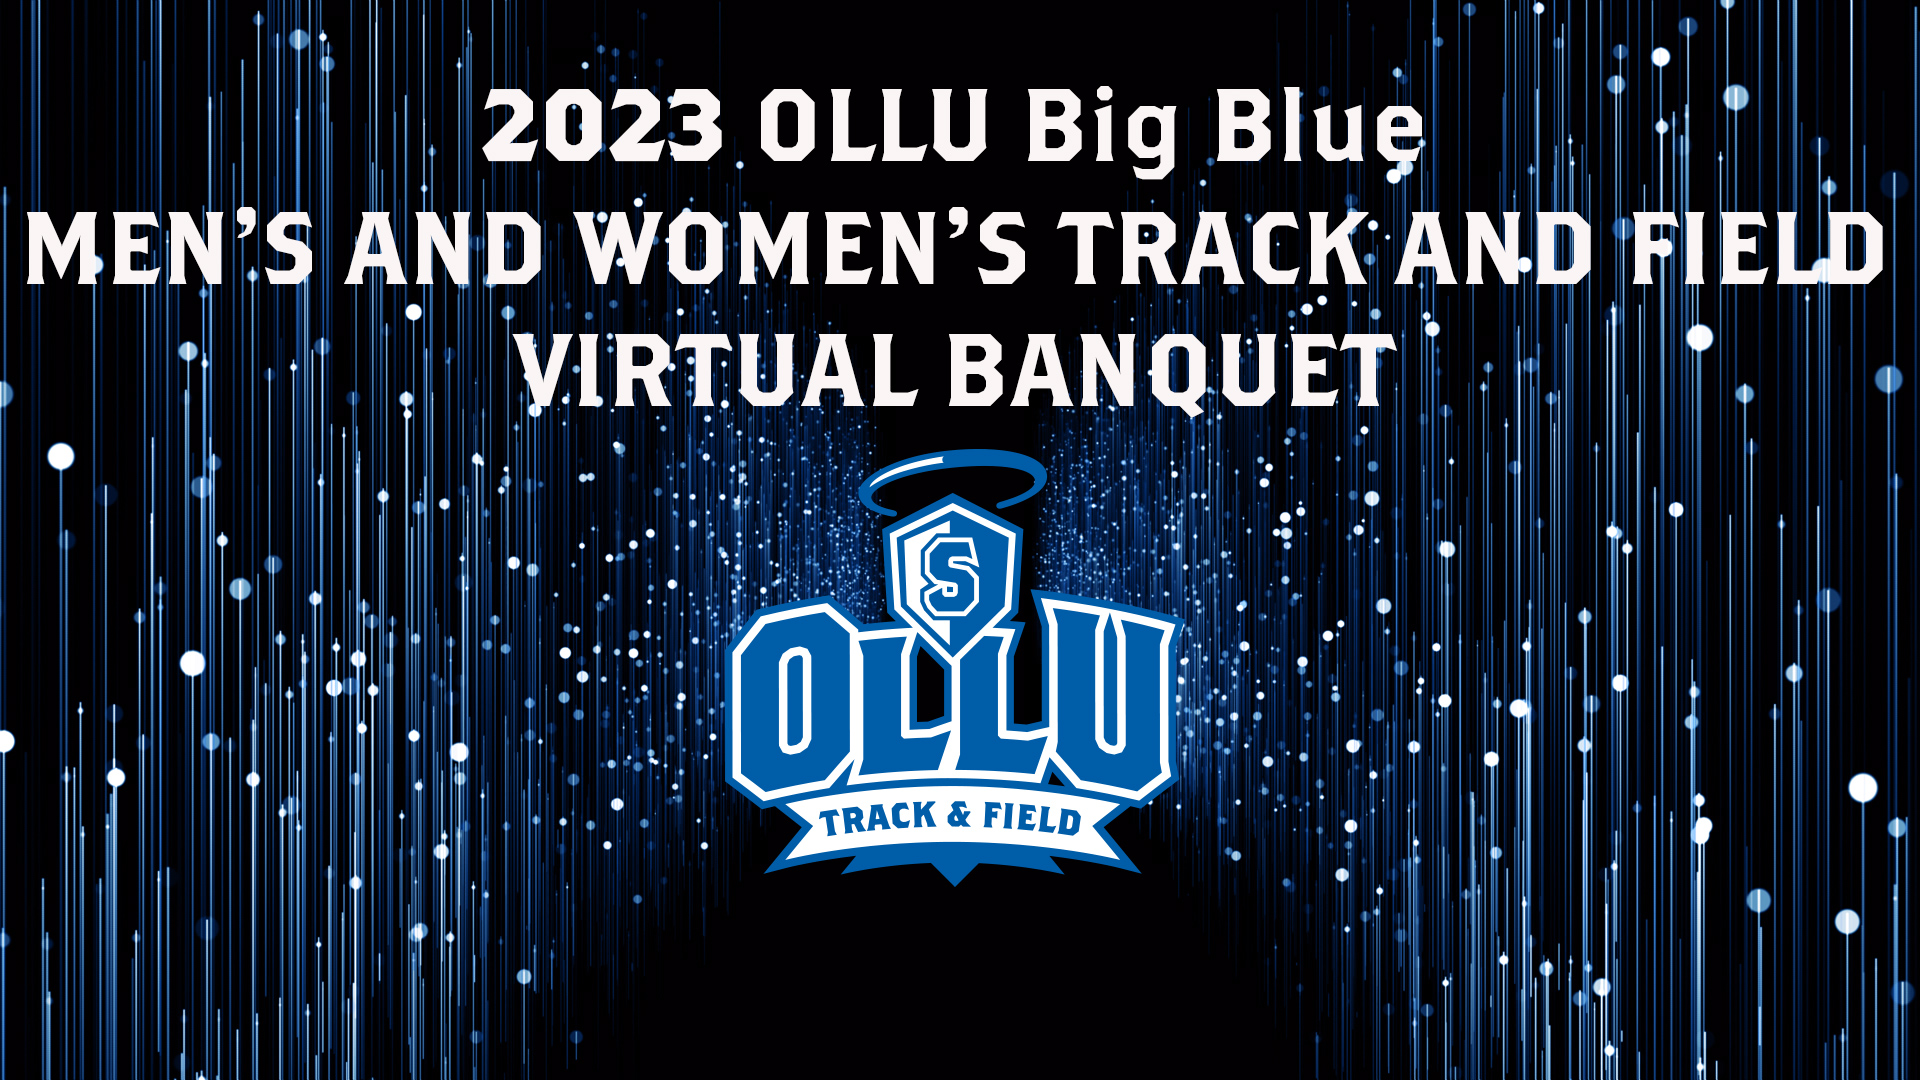 OLLU Celebrates The Achievements of the Track and Field Teams